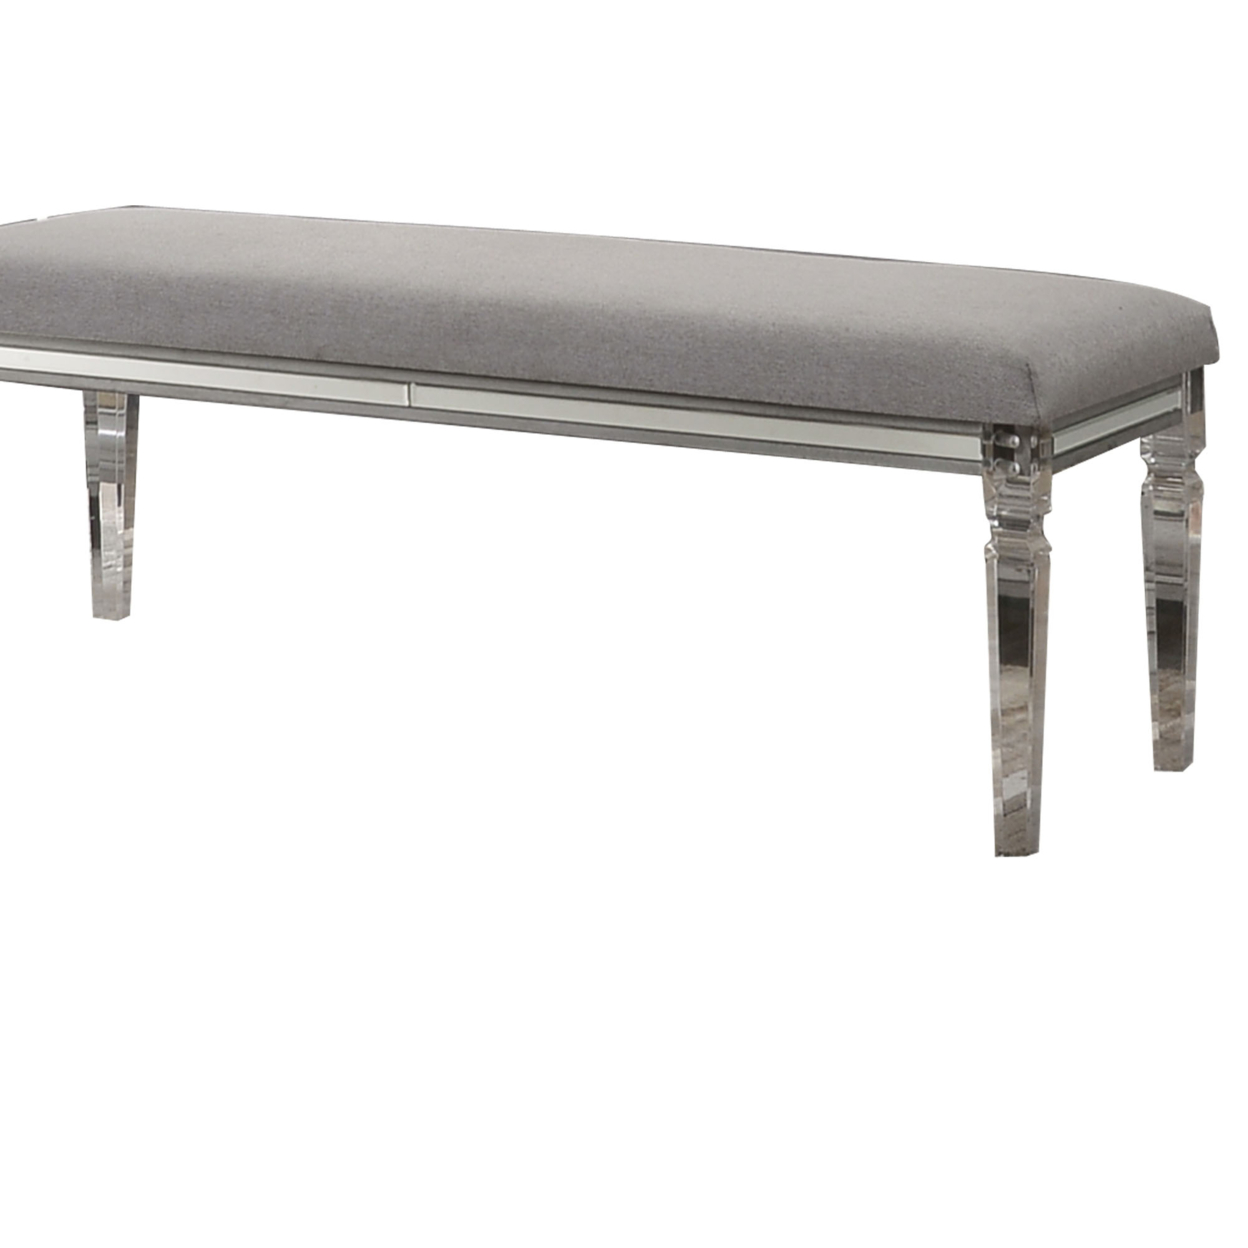 Fabric Upholstered Bench With Acrylic Legs And Silver Accents, Gray- Saltoro Sherpi